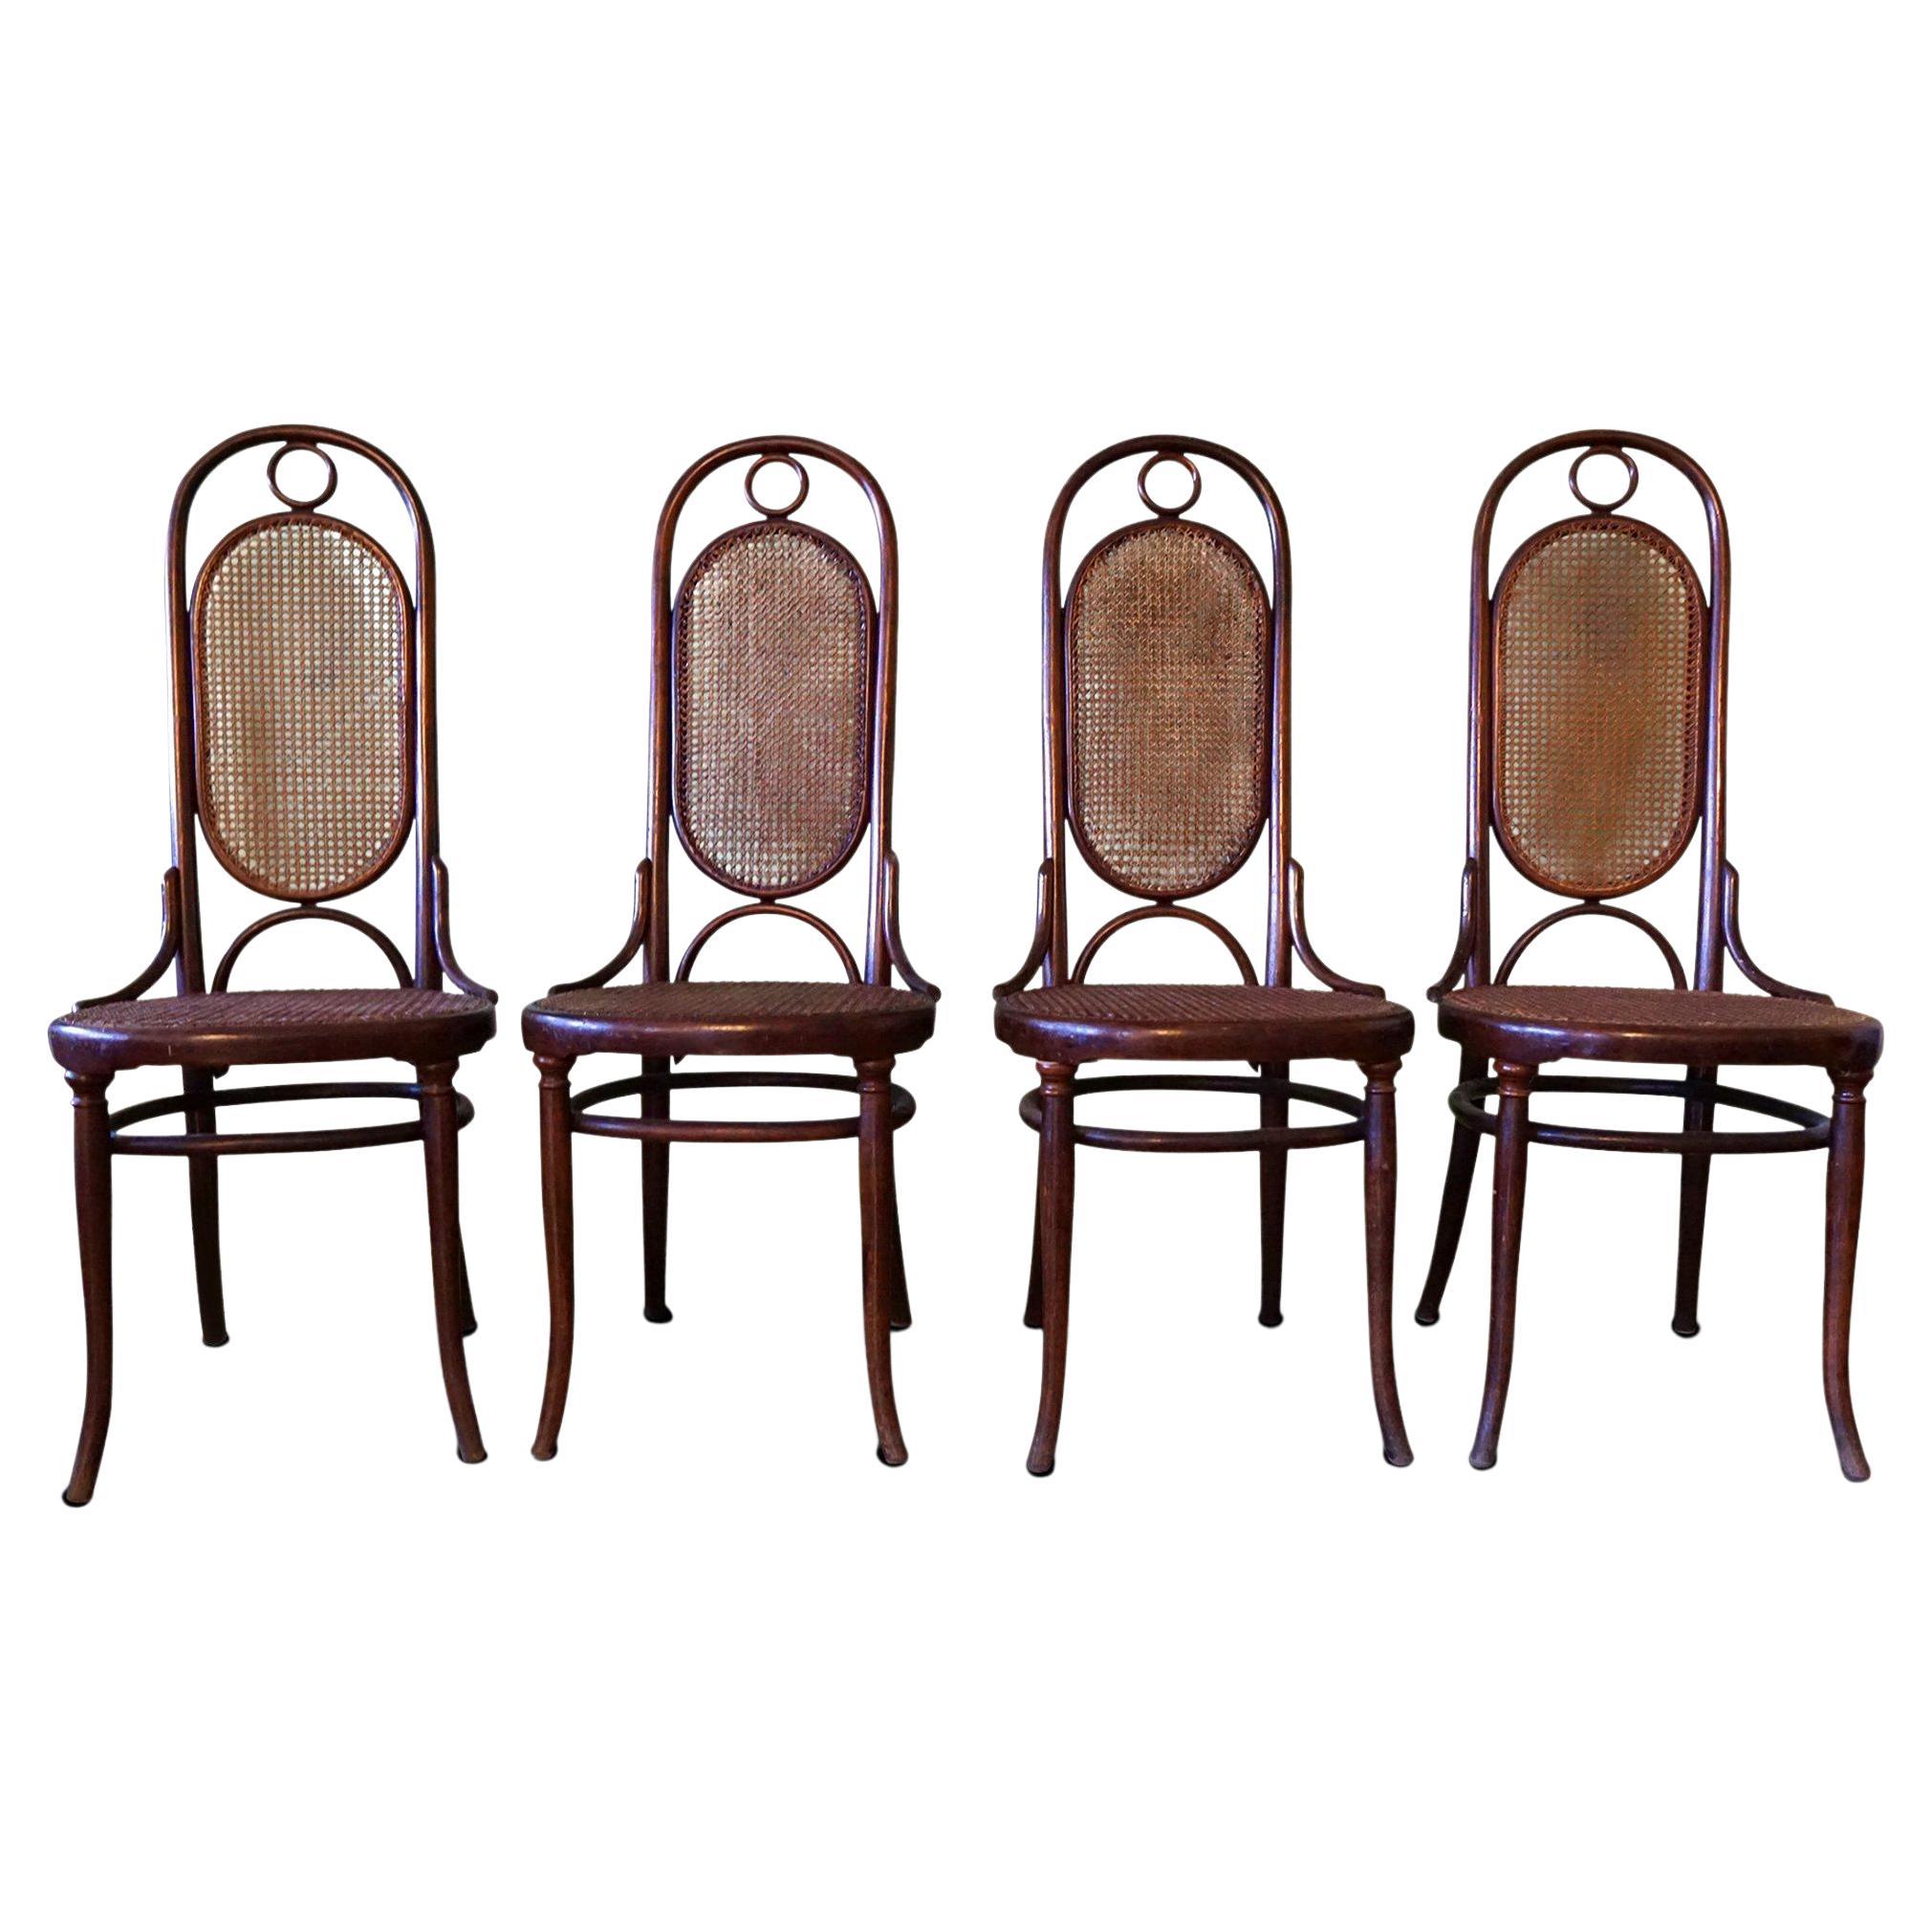 4 Original Tonet Chairs For Sale